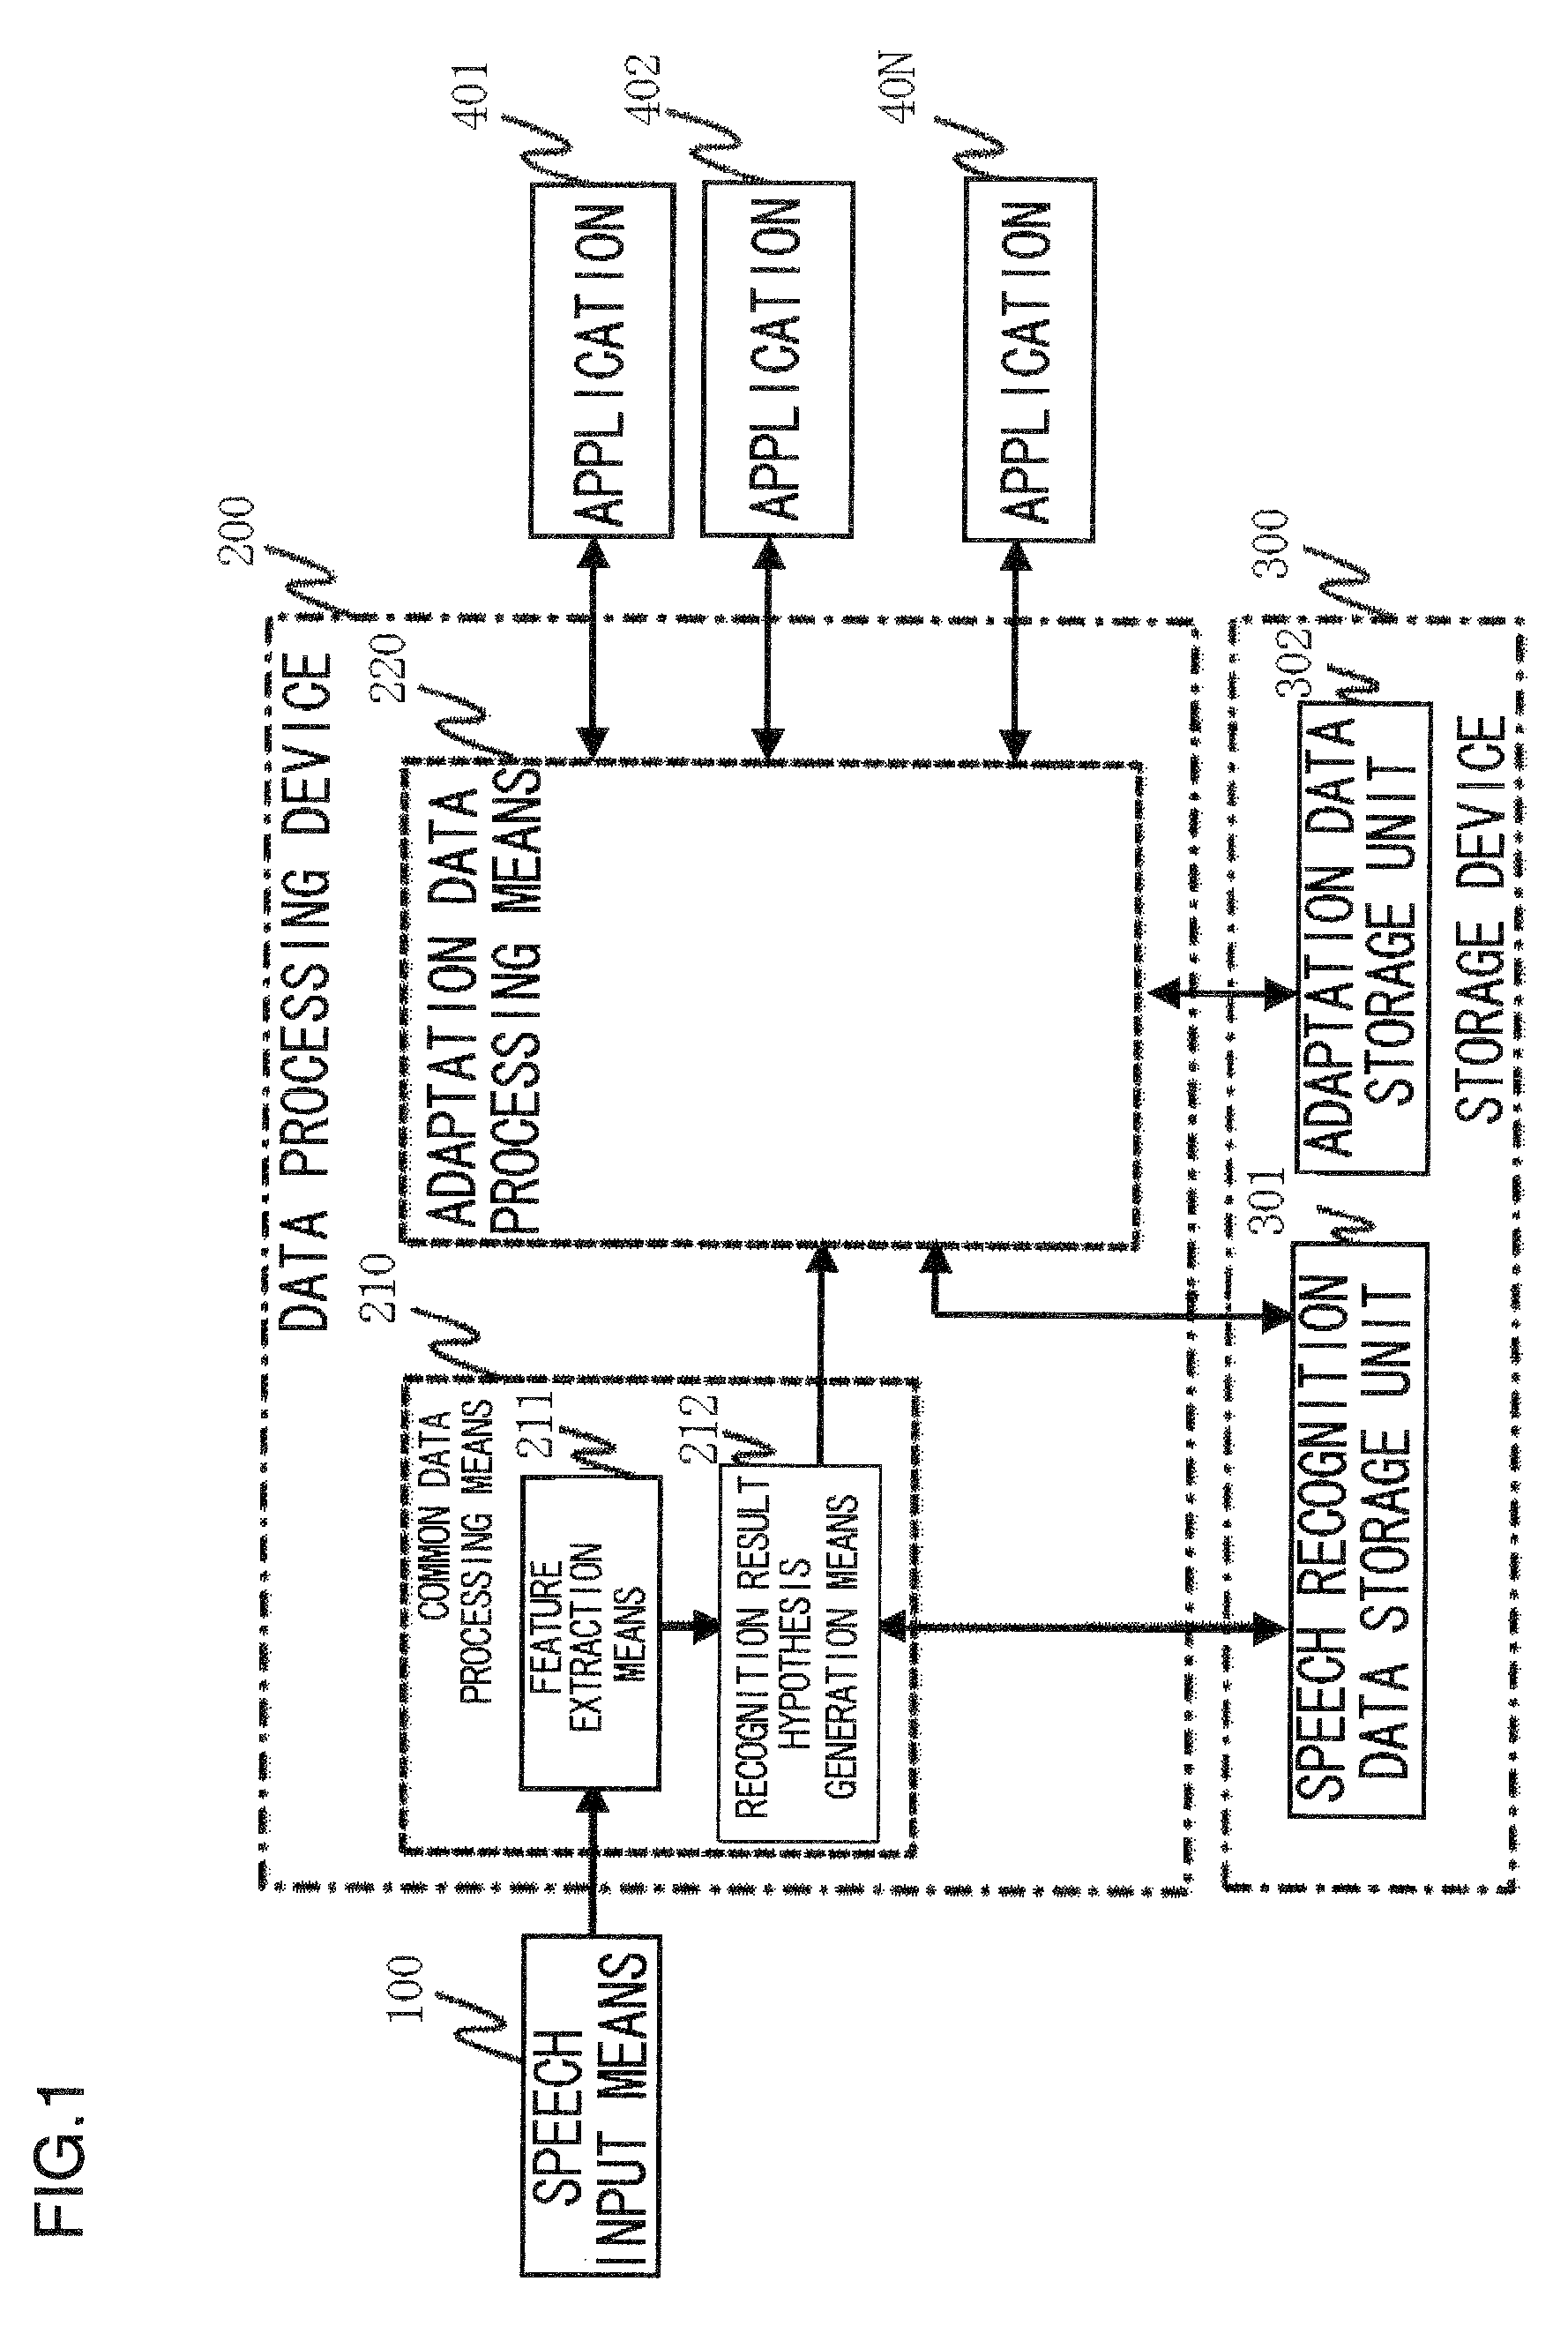 Speech recognition system and method for plural applications